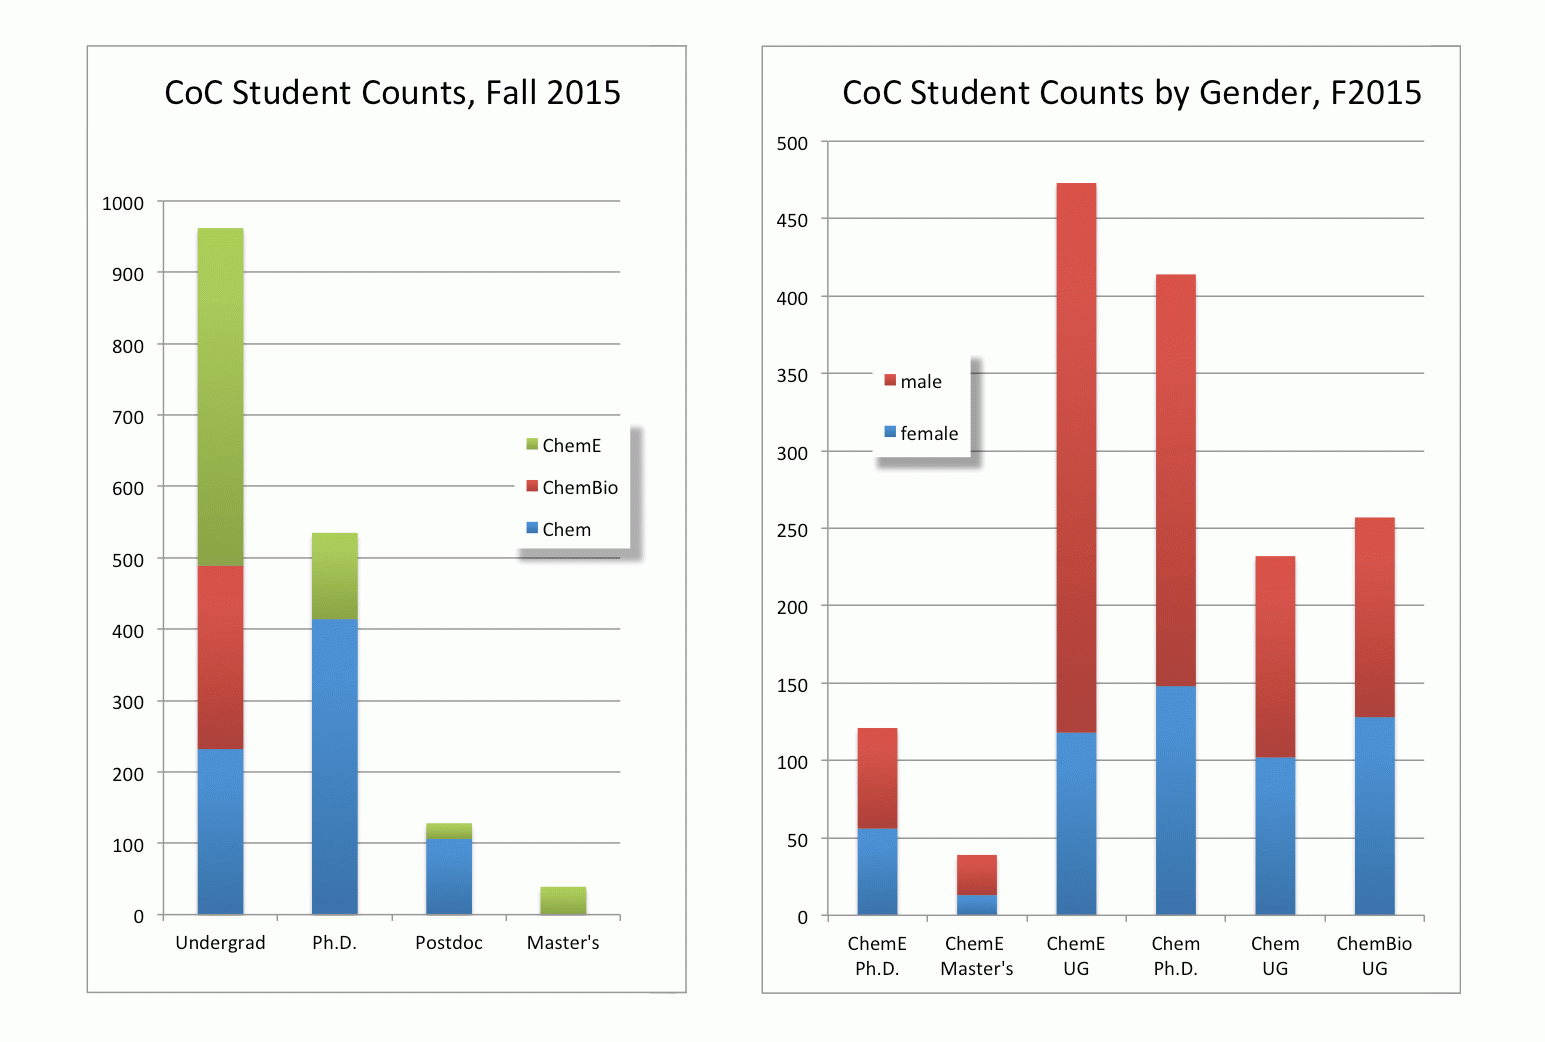 charts of student counts and student counts by gender for 2015